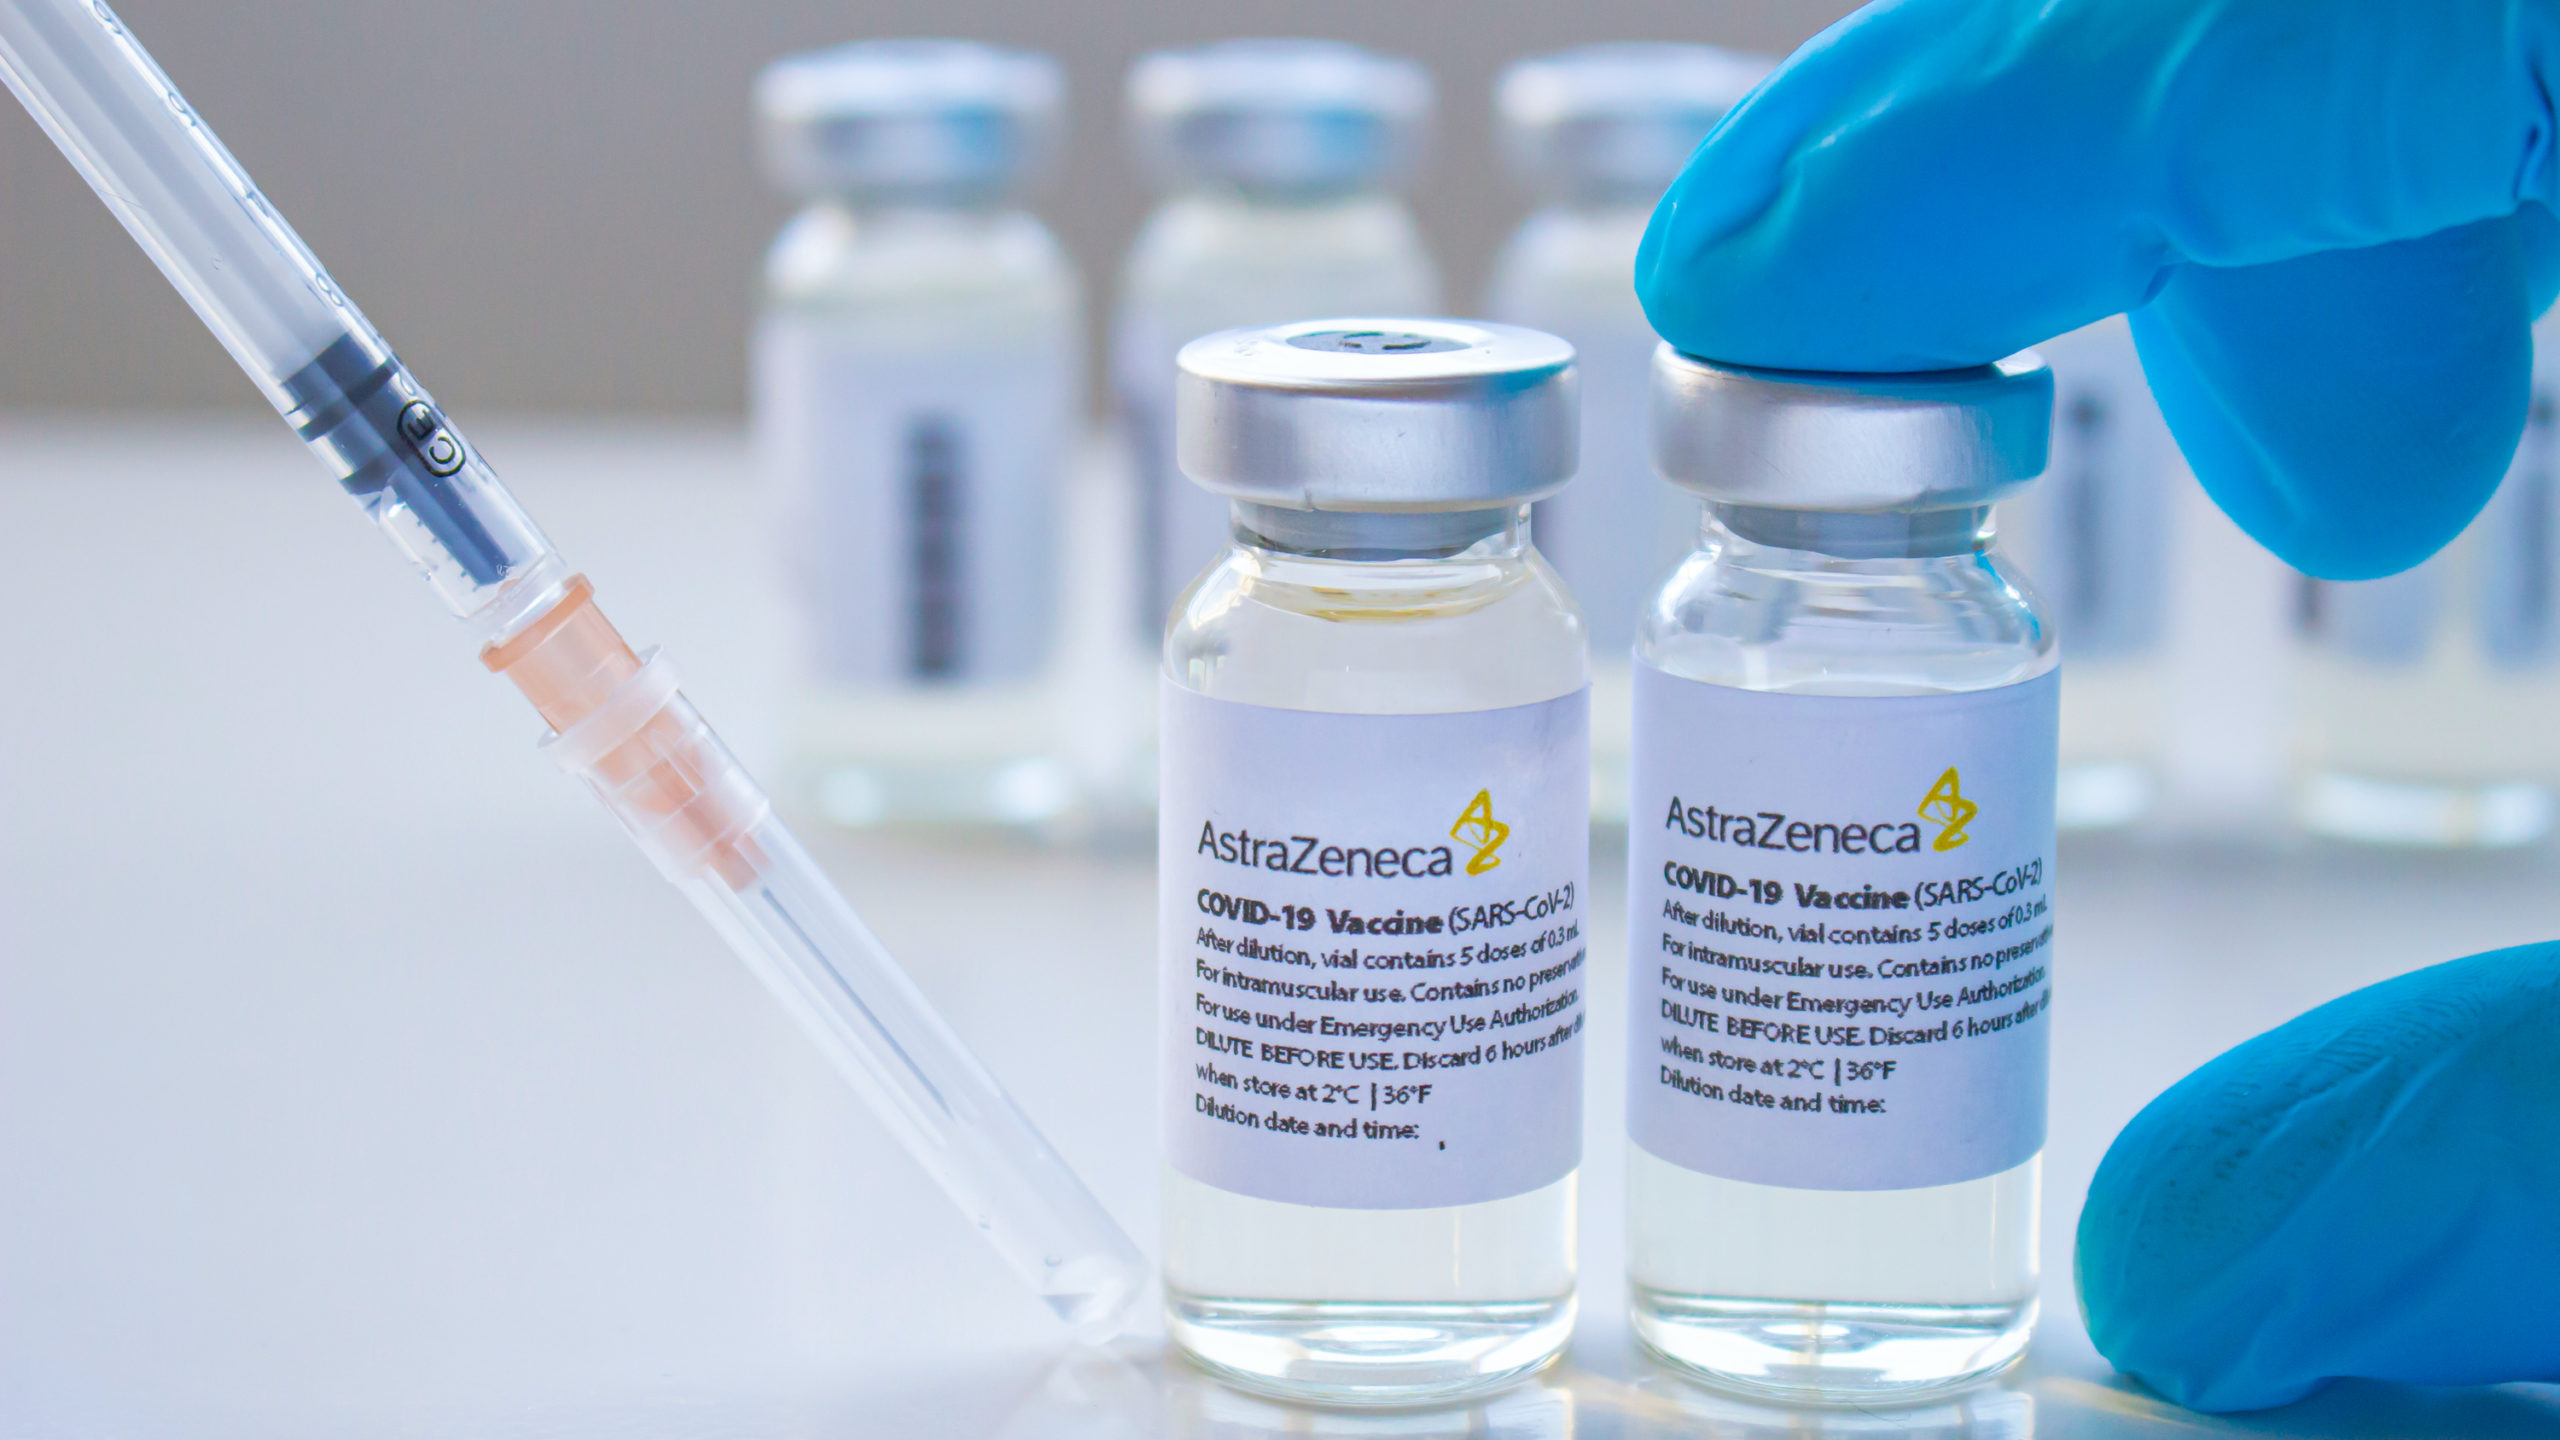 What’s the Deal With the AstraZeneca Vaccine?